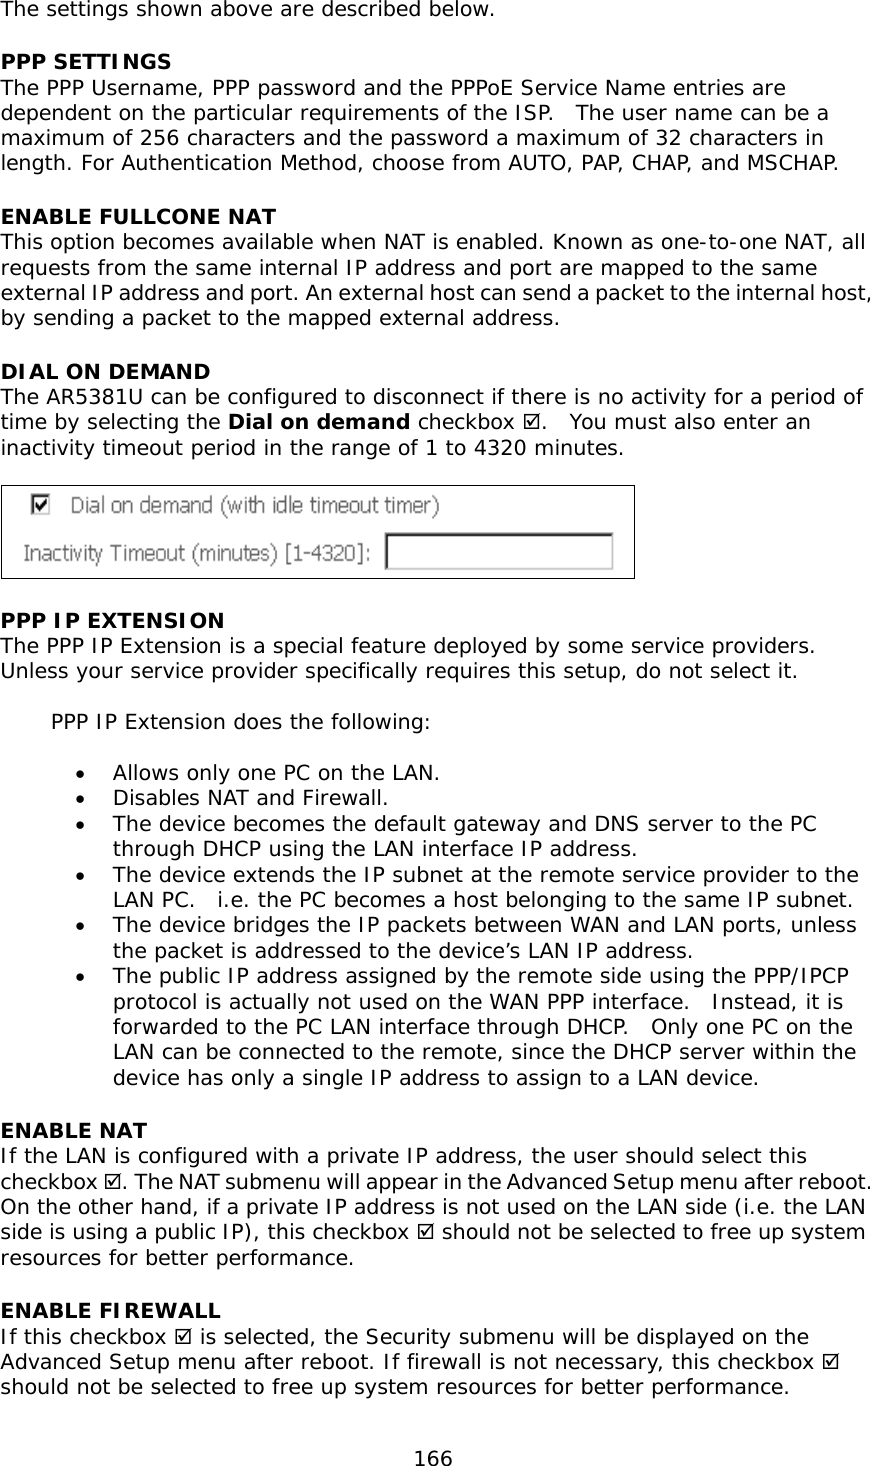  166  The settings shown above are described below. PPP SETTINGS The PPP Username, PPP password and the PPPoE Service Name entries are dependent on the particular requirements of the ISP.  The user name can be a maximum of 256 characters and the password a maximum of 32 characters in length. For Authentication Method, choose from AUTO, PAP, CHAP, and MSCHAP. ENABLE FULLCONE NAT This option becomes available when NAT is enabled. Known as one-to-one NAT, all requests from the same internal IP address and port are mapped to the same external IP address and port. An external host can send a packet to the internal host, by sending a packet to the mapped external address. DIAL ON DEMAND The AR5381U can be configured to disconnect if there is no activity for a period of time by selecting the Dial on demand checkbox .  You must also enter an inactivity timeout period in the range of 1 to 4320 minutes.     PPP IP EXTENSION The PPP IP Extension is a special feature deployed by some service providers.  Unless your service provider specifically requires this setup, do not select it.    PPP IP Extension does the following:  •  Allows only one PC on the LAN. •  Disables NAT and Firewall. •  The device becomes the default gateway and DNS server to the PC through DHCP using the LAN interface IP address. •  The device extends the IP subnet at the remote service provider to the LAN PC.  i.e. the PC becomes a host belonging to the same IP subnet. •  The device bridges the IP packets between WAN and LAN ports, unless the packet is addressed to the device’s LAN IP address. •  The public IP address assigned by the remote side using the PPP/IPCP protocol is actually not used on the WAN PPP interface.  Instead, it is forwarded to the PC LAN interface through DHCP.  Only one PC on the LAN can be connected to the remote, since the DHCP server within the device has only a single IP address to assign to a LAN device. ENABLE NAT If the LAN is configured with a private IP address, the user should select this checkbox . The NAT submenu will appear in the Advanced Setup menu after reboot.   On the other hand, if a private IP address is not used on the LAN side (i.e. the LAN side is using a public IP), this checkbox  should not be selected to free up system resources for better performance.   ENABLE FIREWALL If this checkbox  is selected, the Security submenu will be displayed on the Advanced Setup menu after reboot. If firewall is not necessary, this checkbox  should not be selected to free up system resources for better performance.   